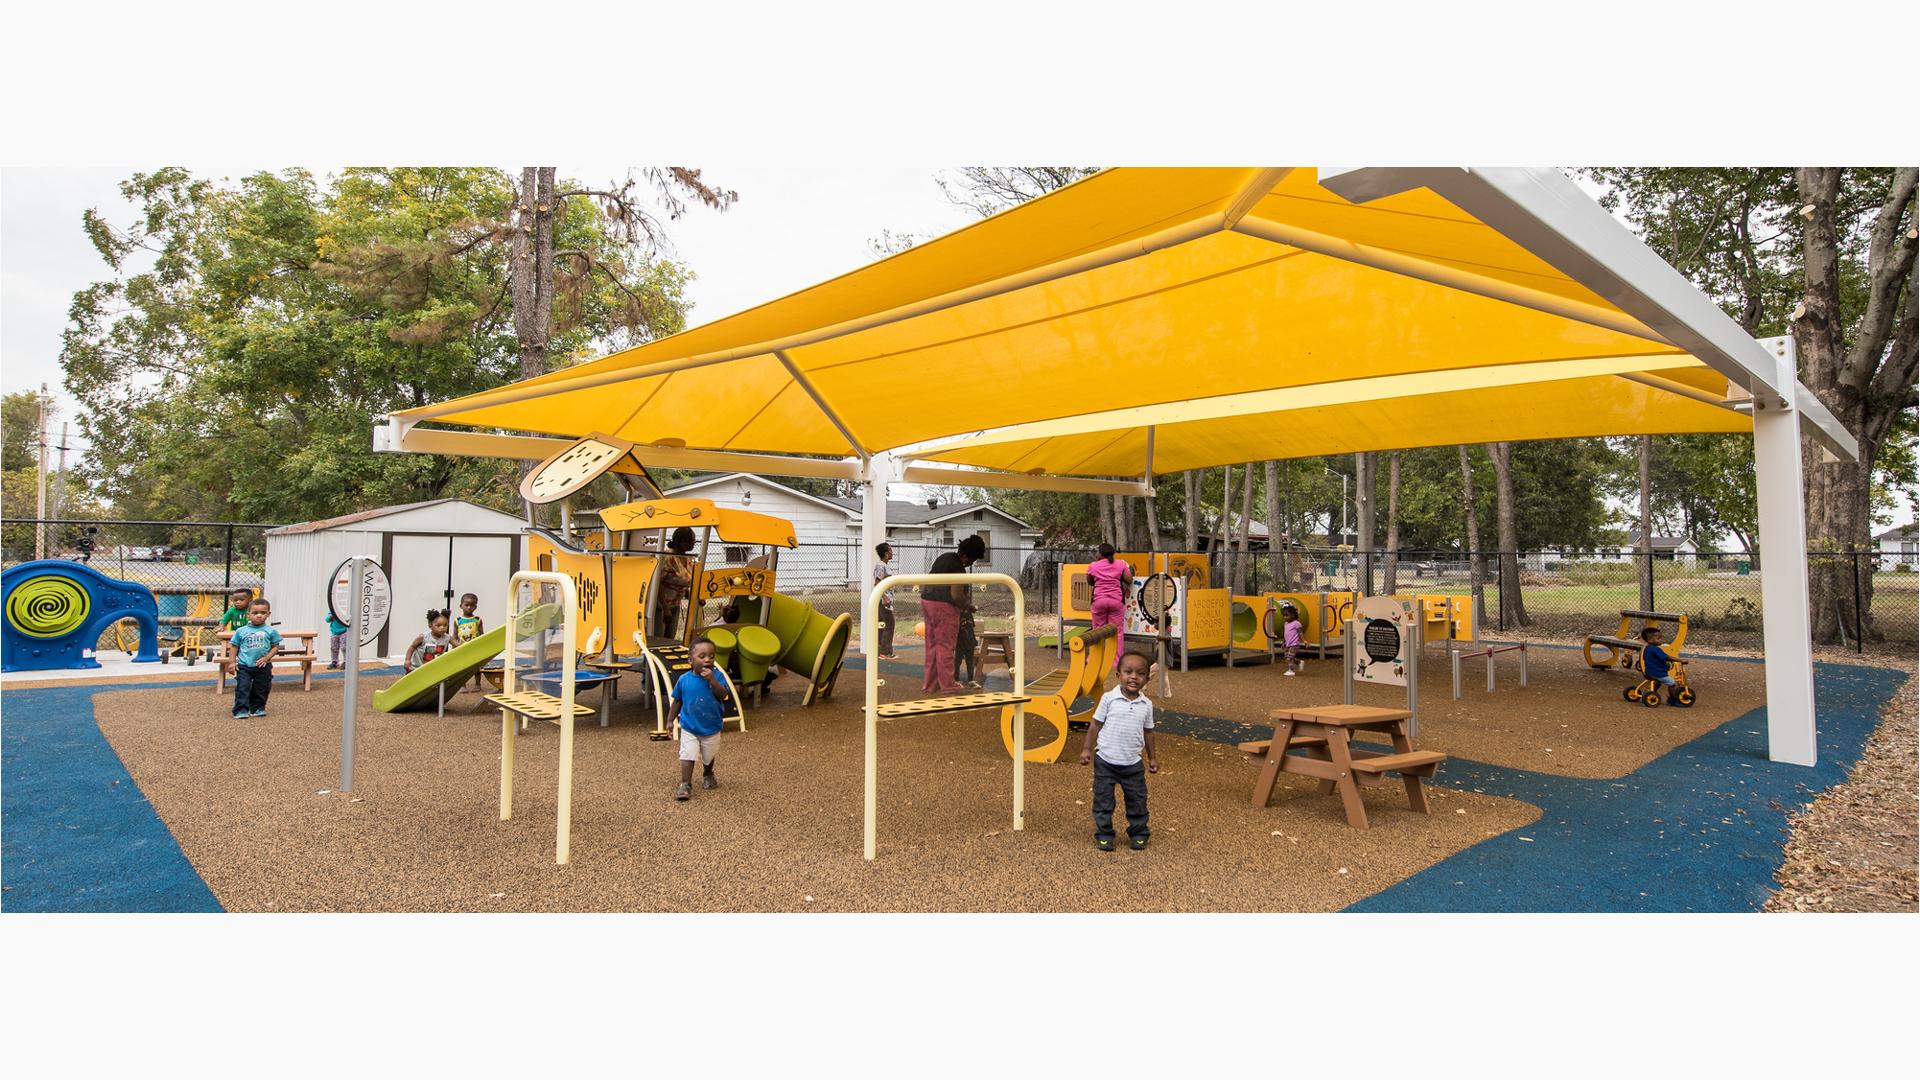 A large yellow shade covers a play area with two separate play structures for toddler aged children. Children and teachers play at the yellow and green colored play activities.